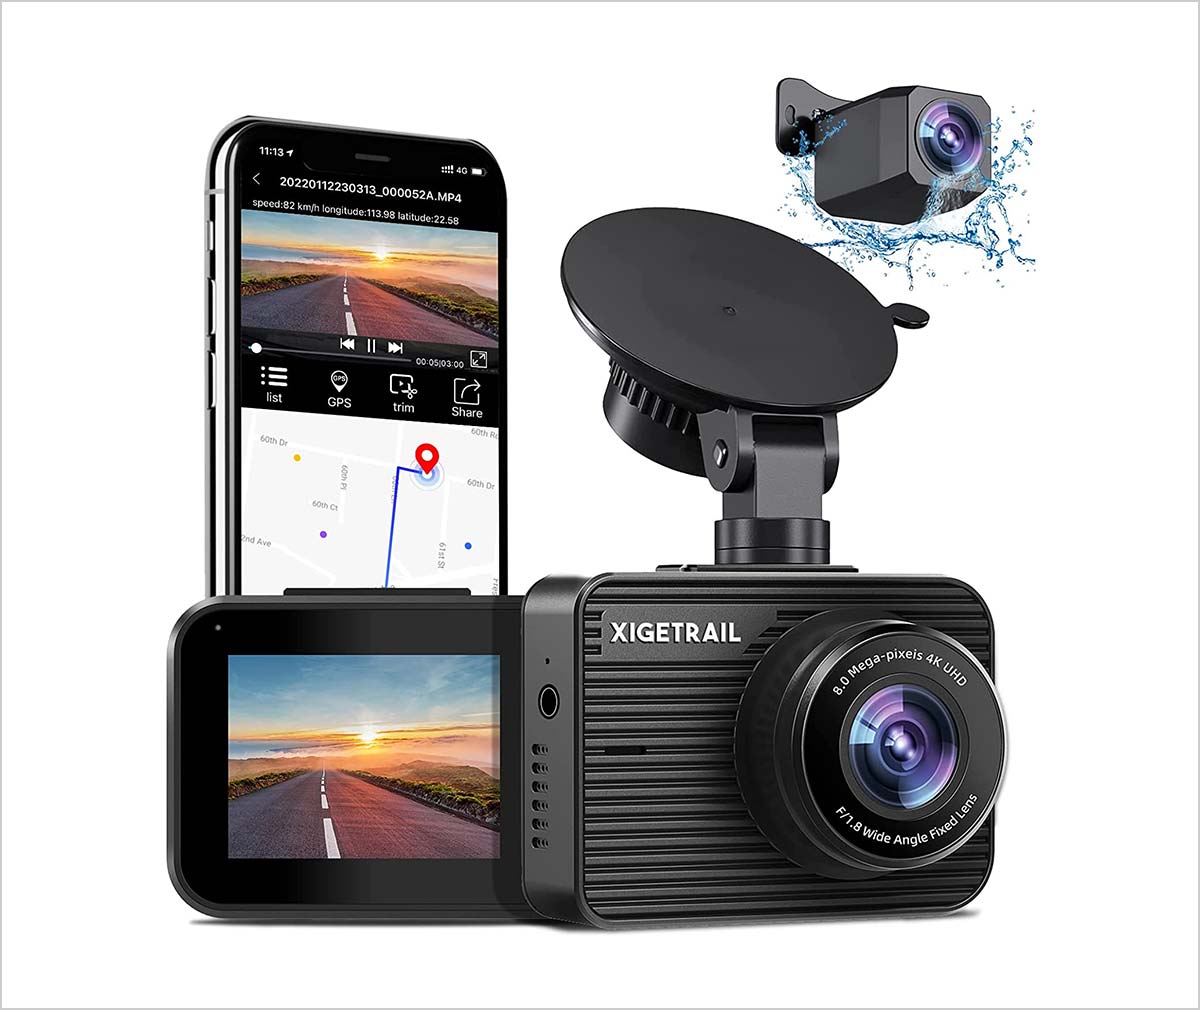 https://www.designbolts.com/wp-content/uploads/2022/03/Upgraded-4K-Dual-Dash-Cam-Front-and-Rear-Built-in-WiFi-GPS-Car-Dashboard-Camera.jpg